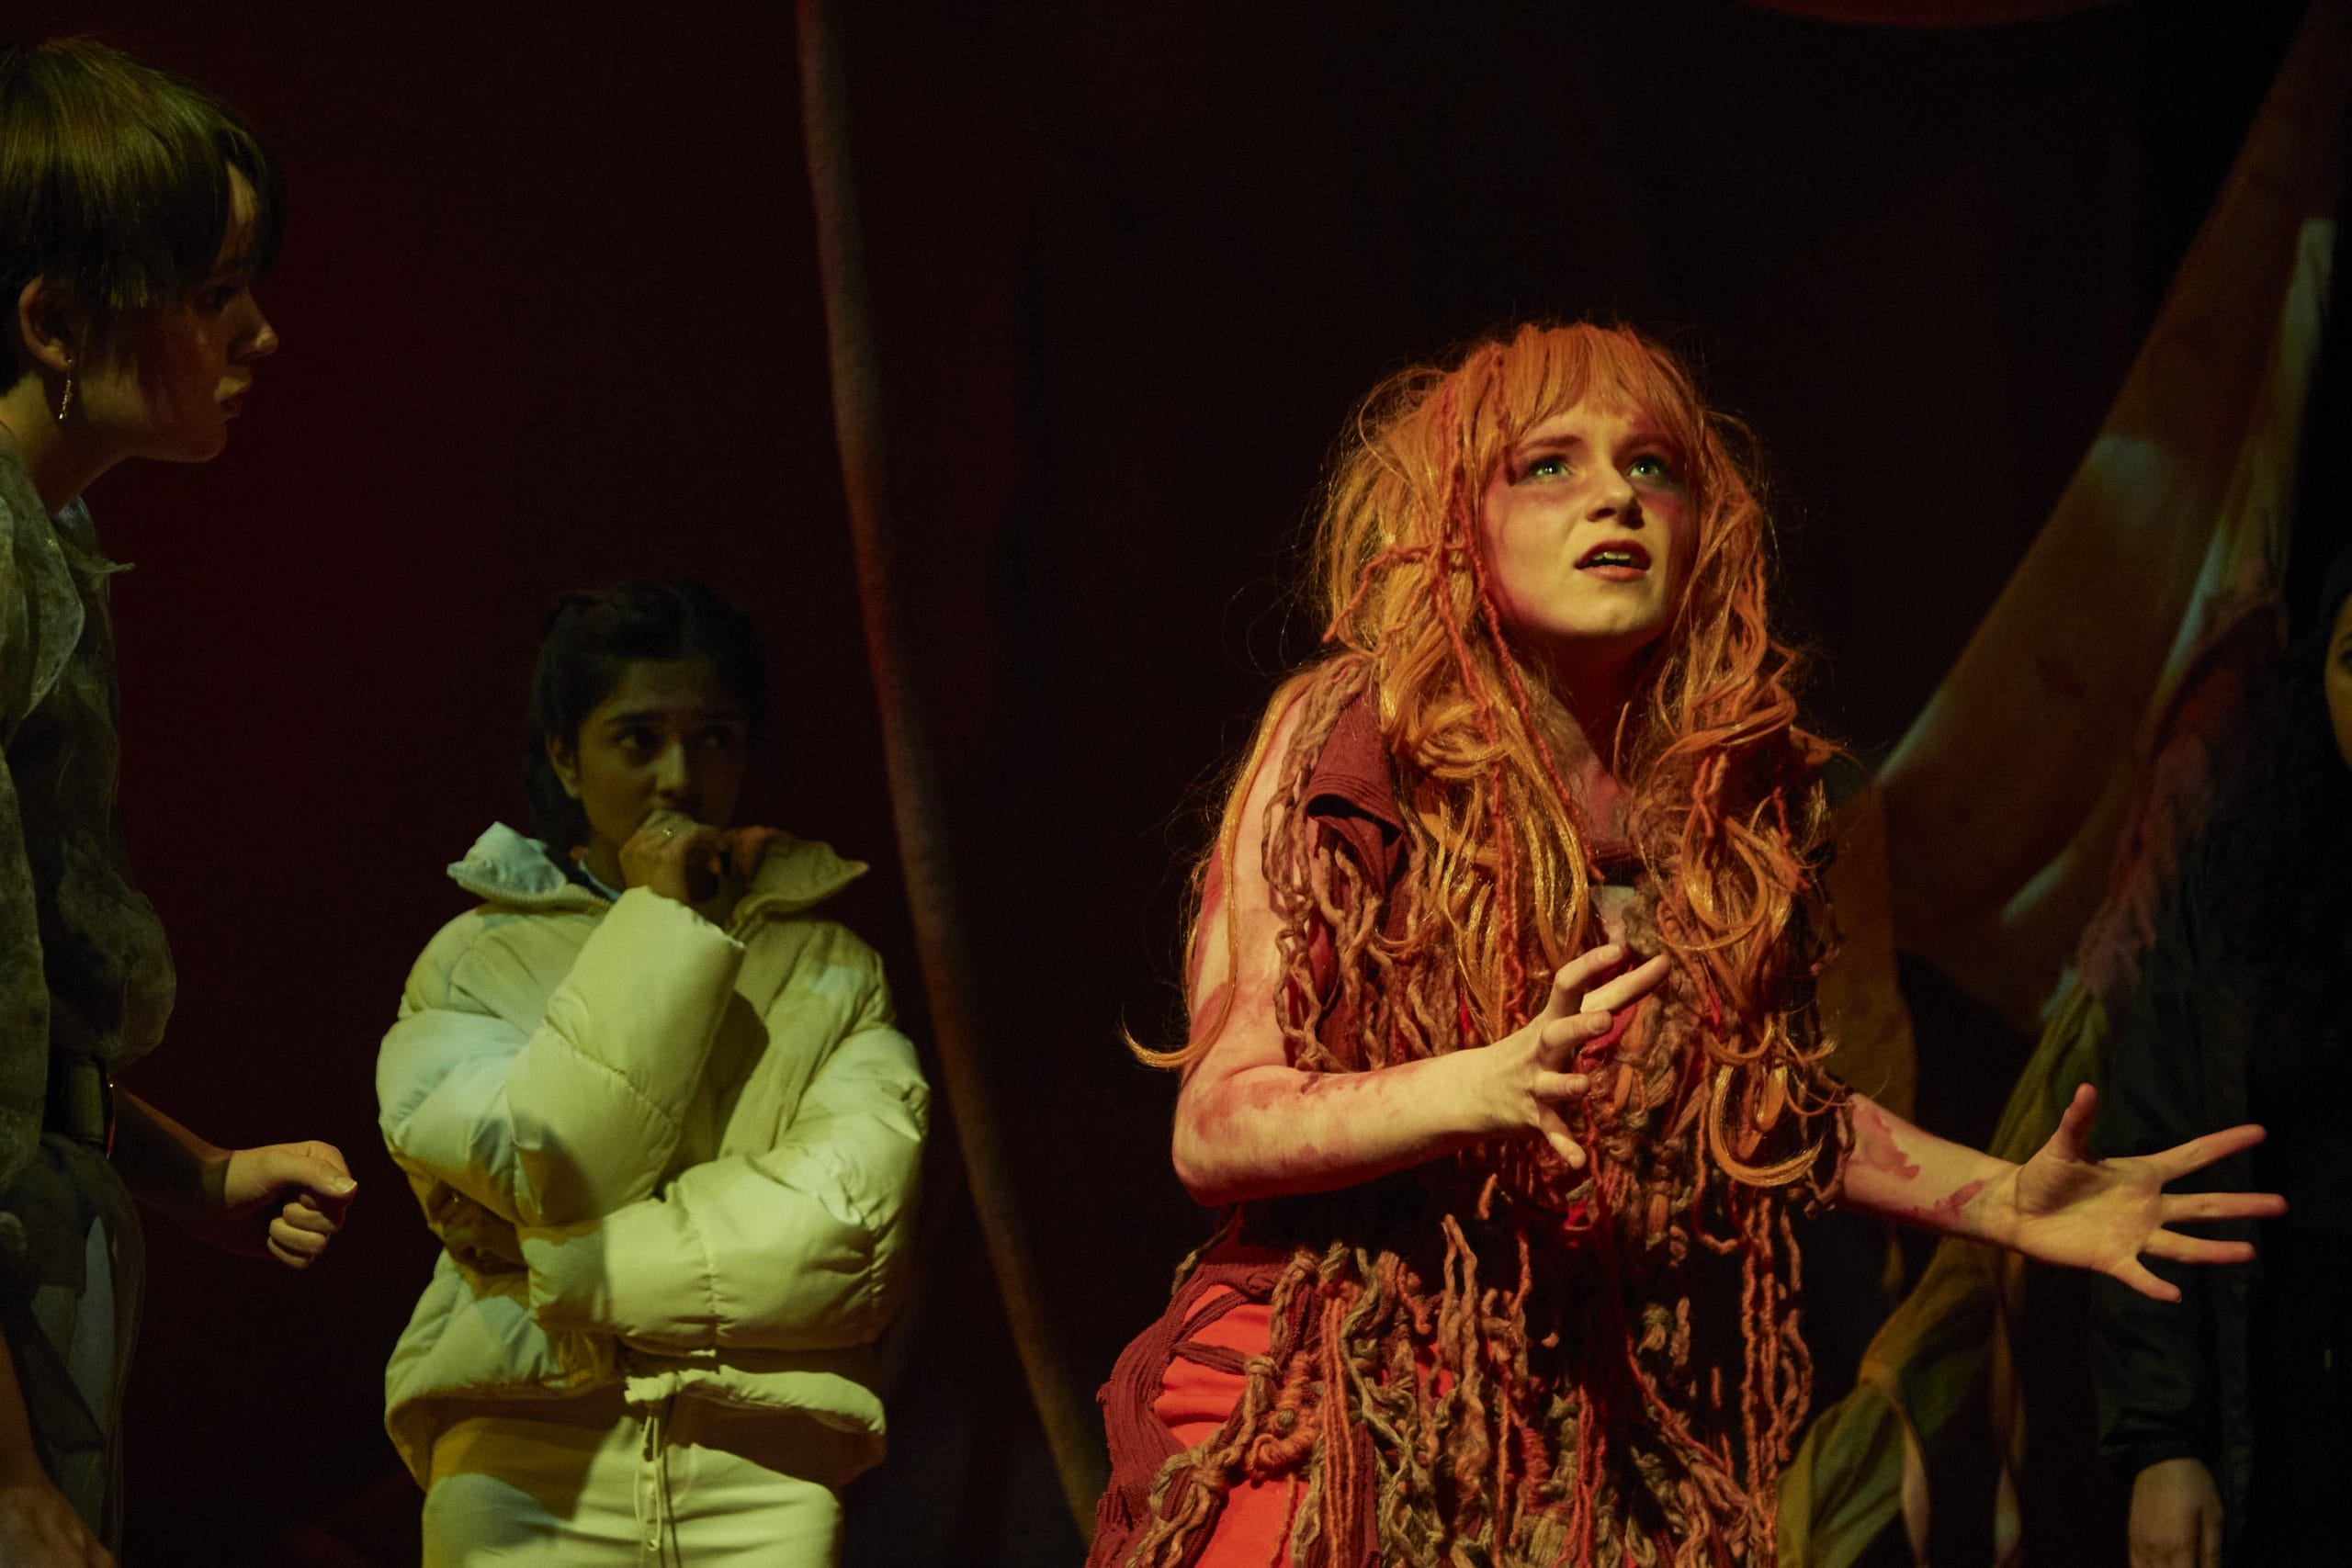 From a production of DNA, a dishevelled looking actor in a red wig and red ripped clothes stares out at the audience whilst other actors look nervous behind her